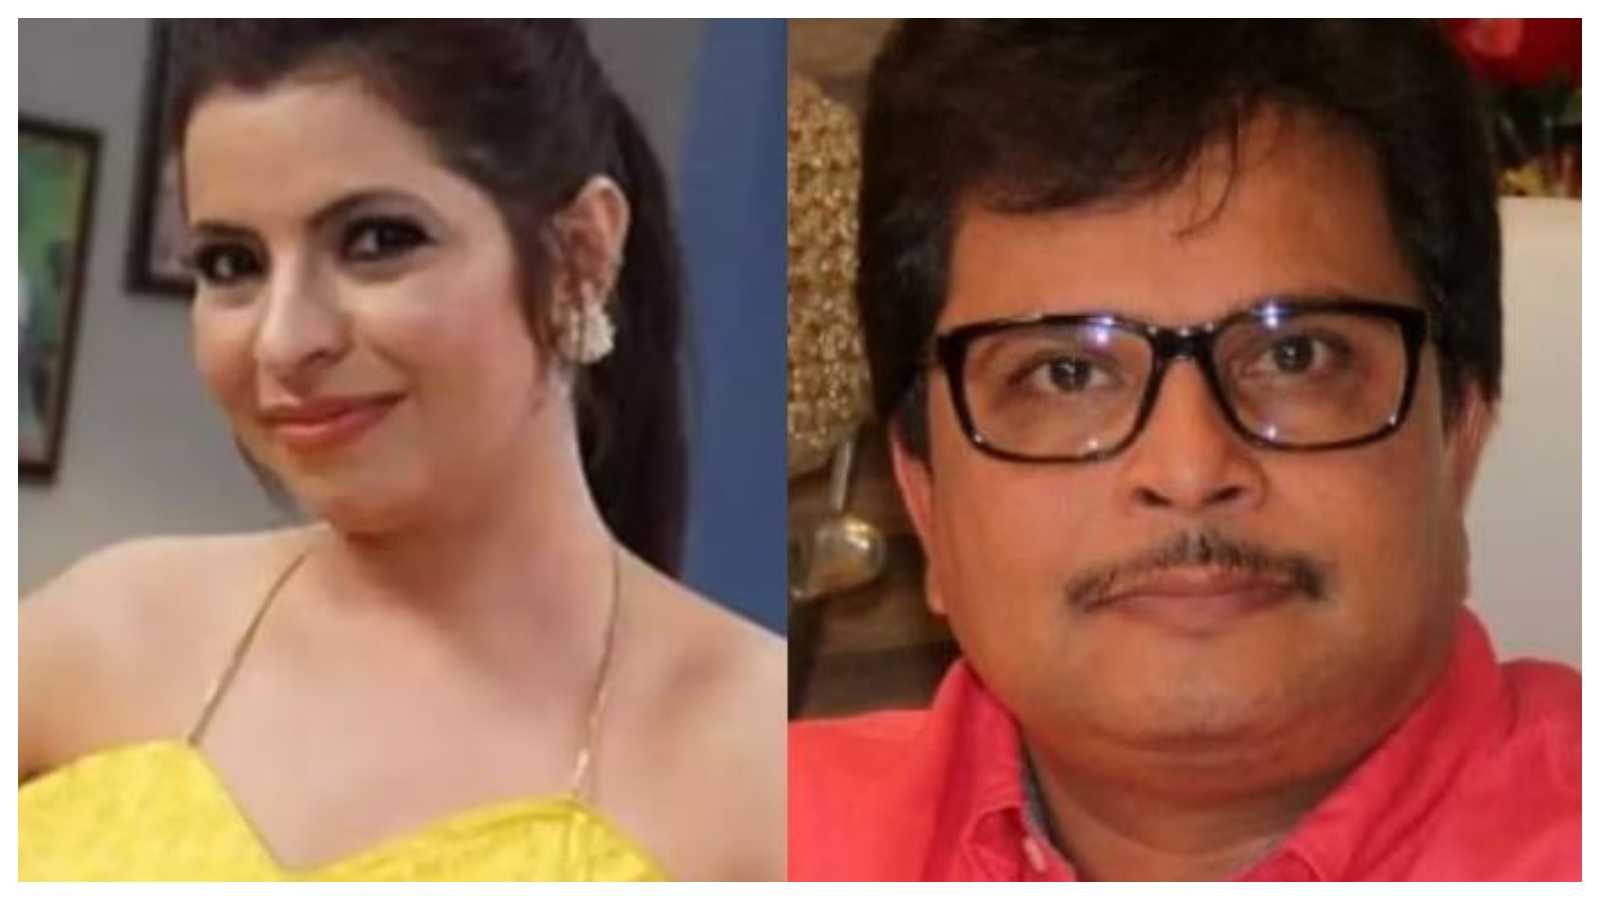 Taarak Mehta Ka Ooltah Chashmah's producer Asit Modi rubbishes claims of sexual harassment by Jennifer Mistry, says 'she is trying to defame me and the show'